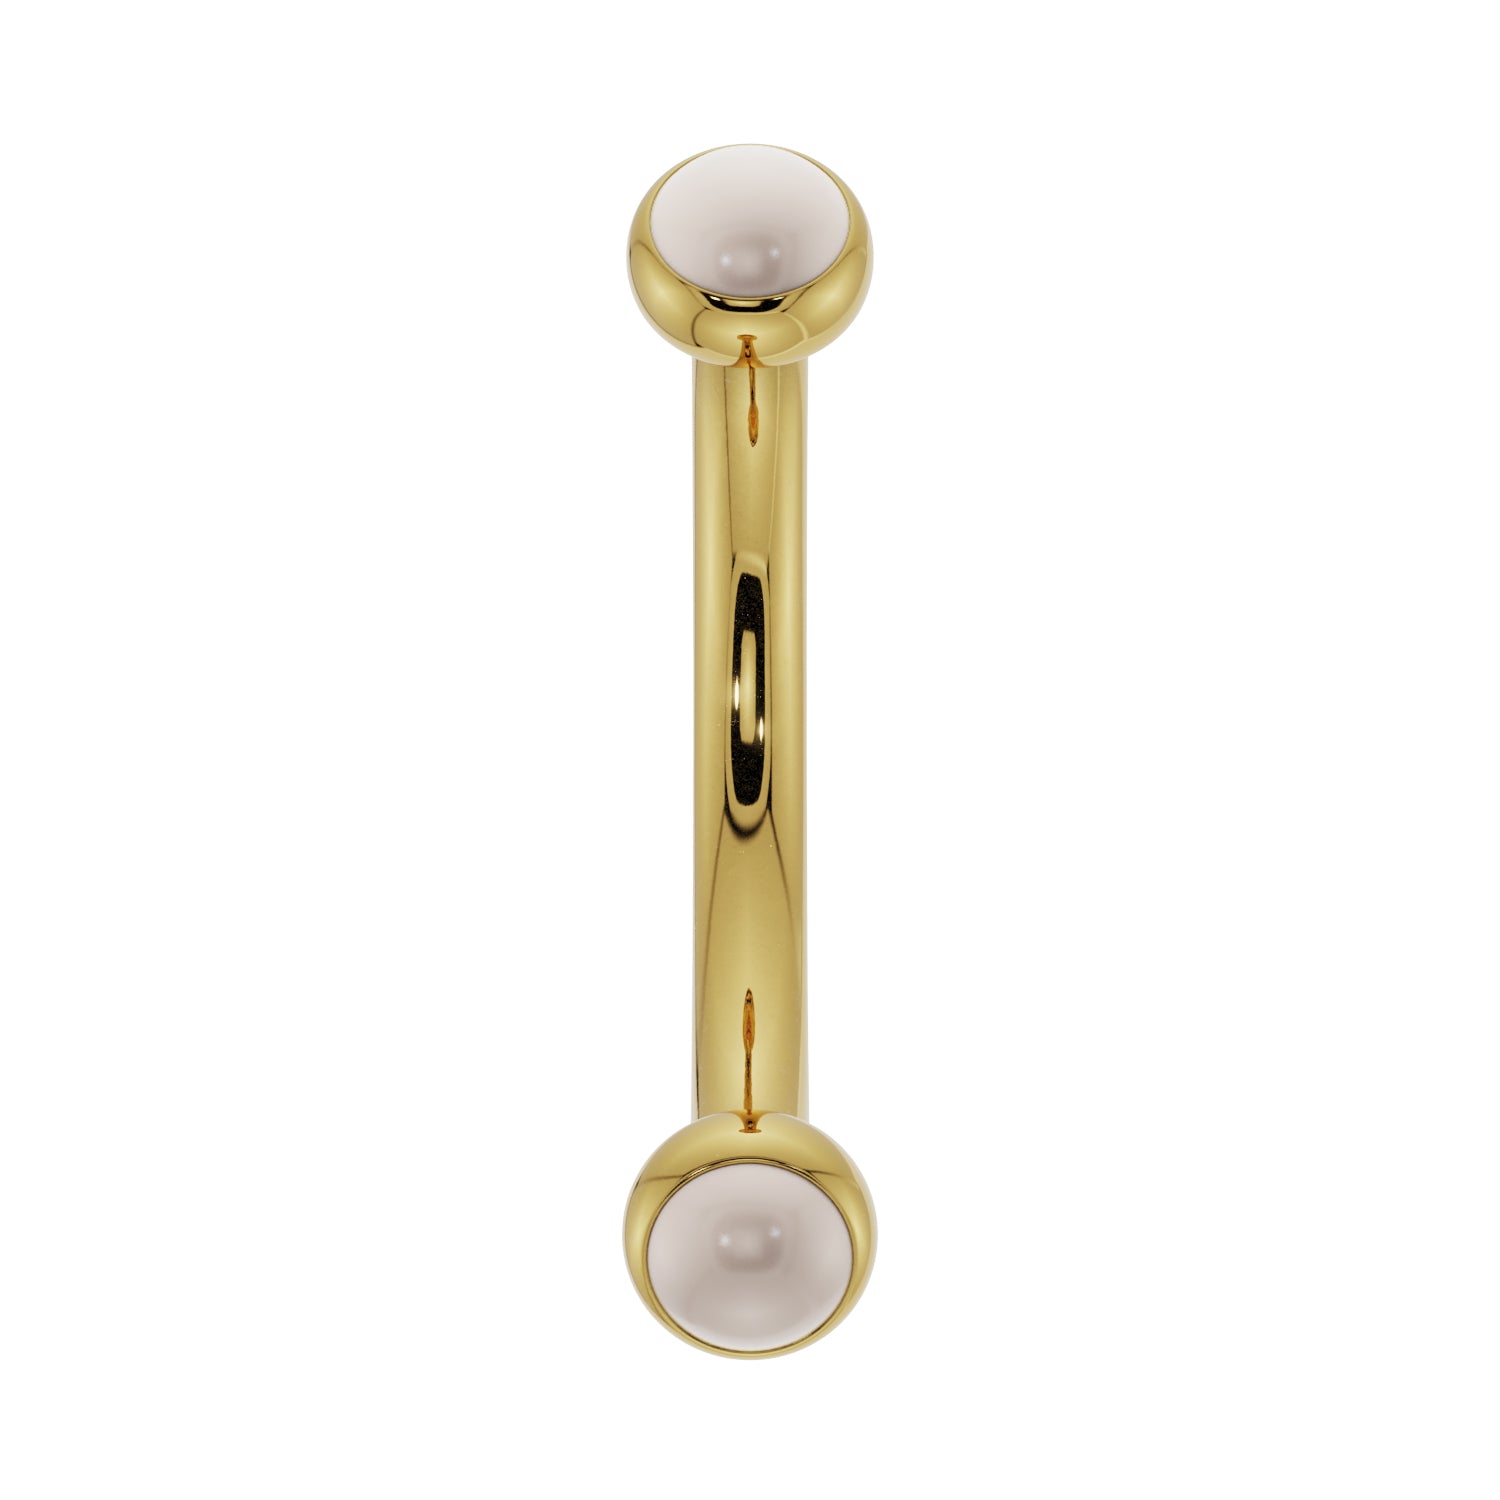 Dainty Pearl Bezel-Set Curved Barbell for Eyebrow Rook Belly-14K Yellow Gold   16G (1.2mm)   7 16